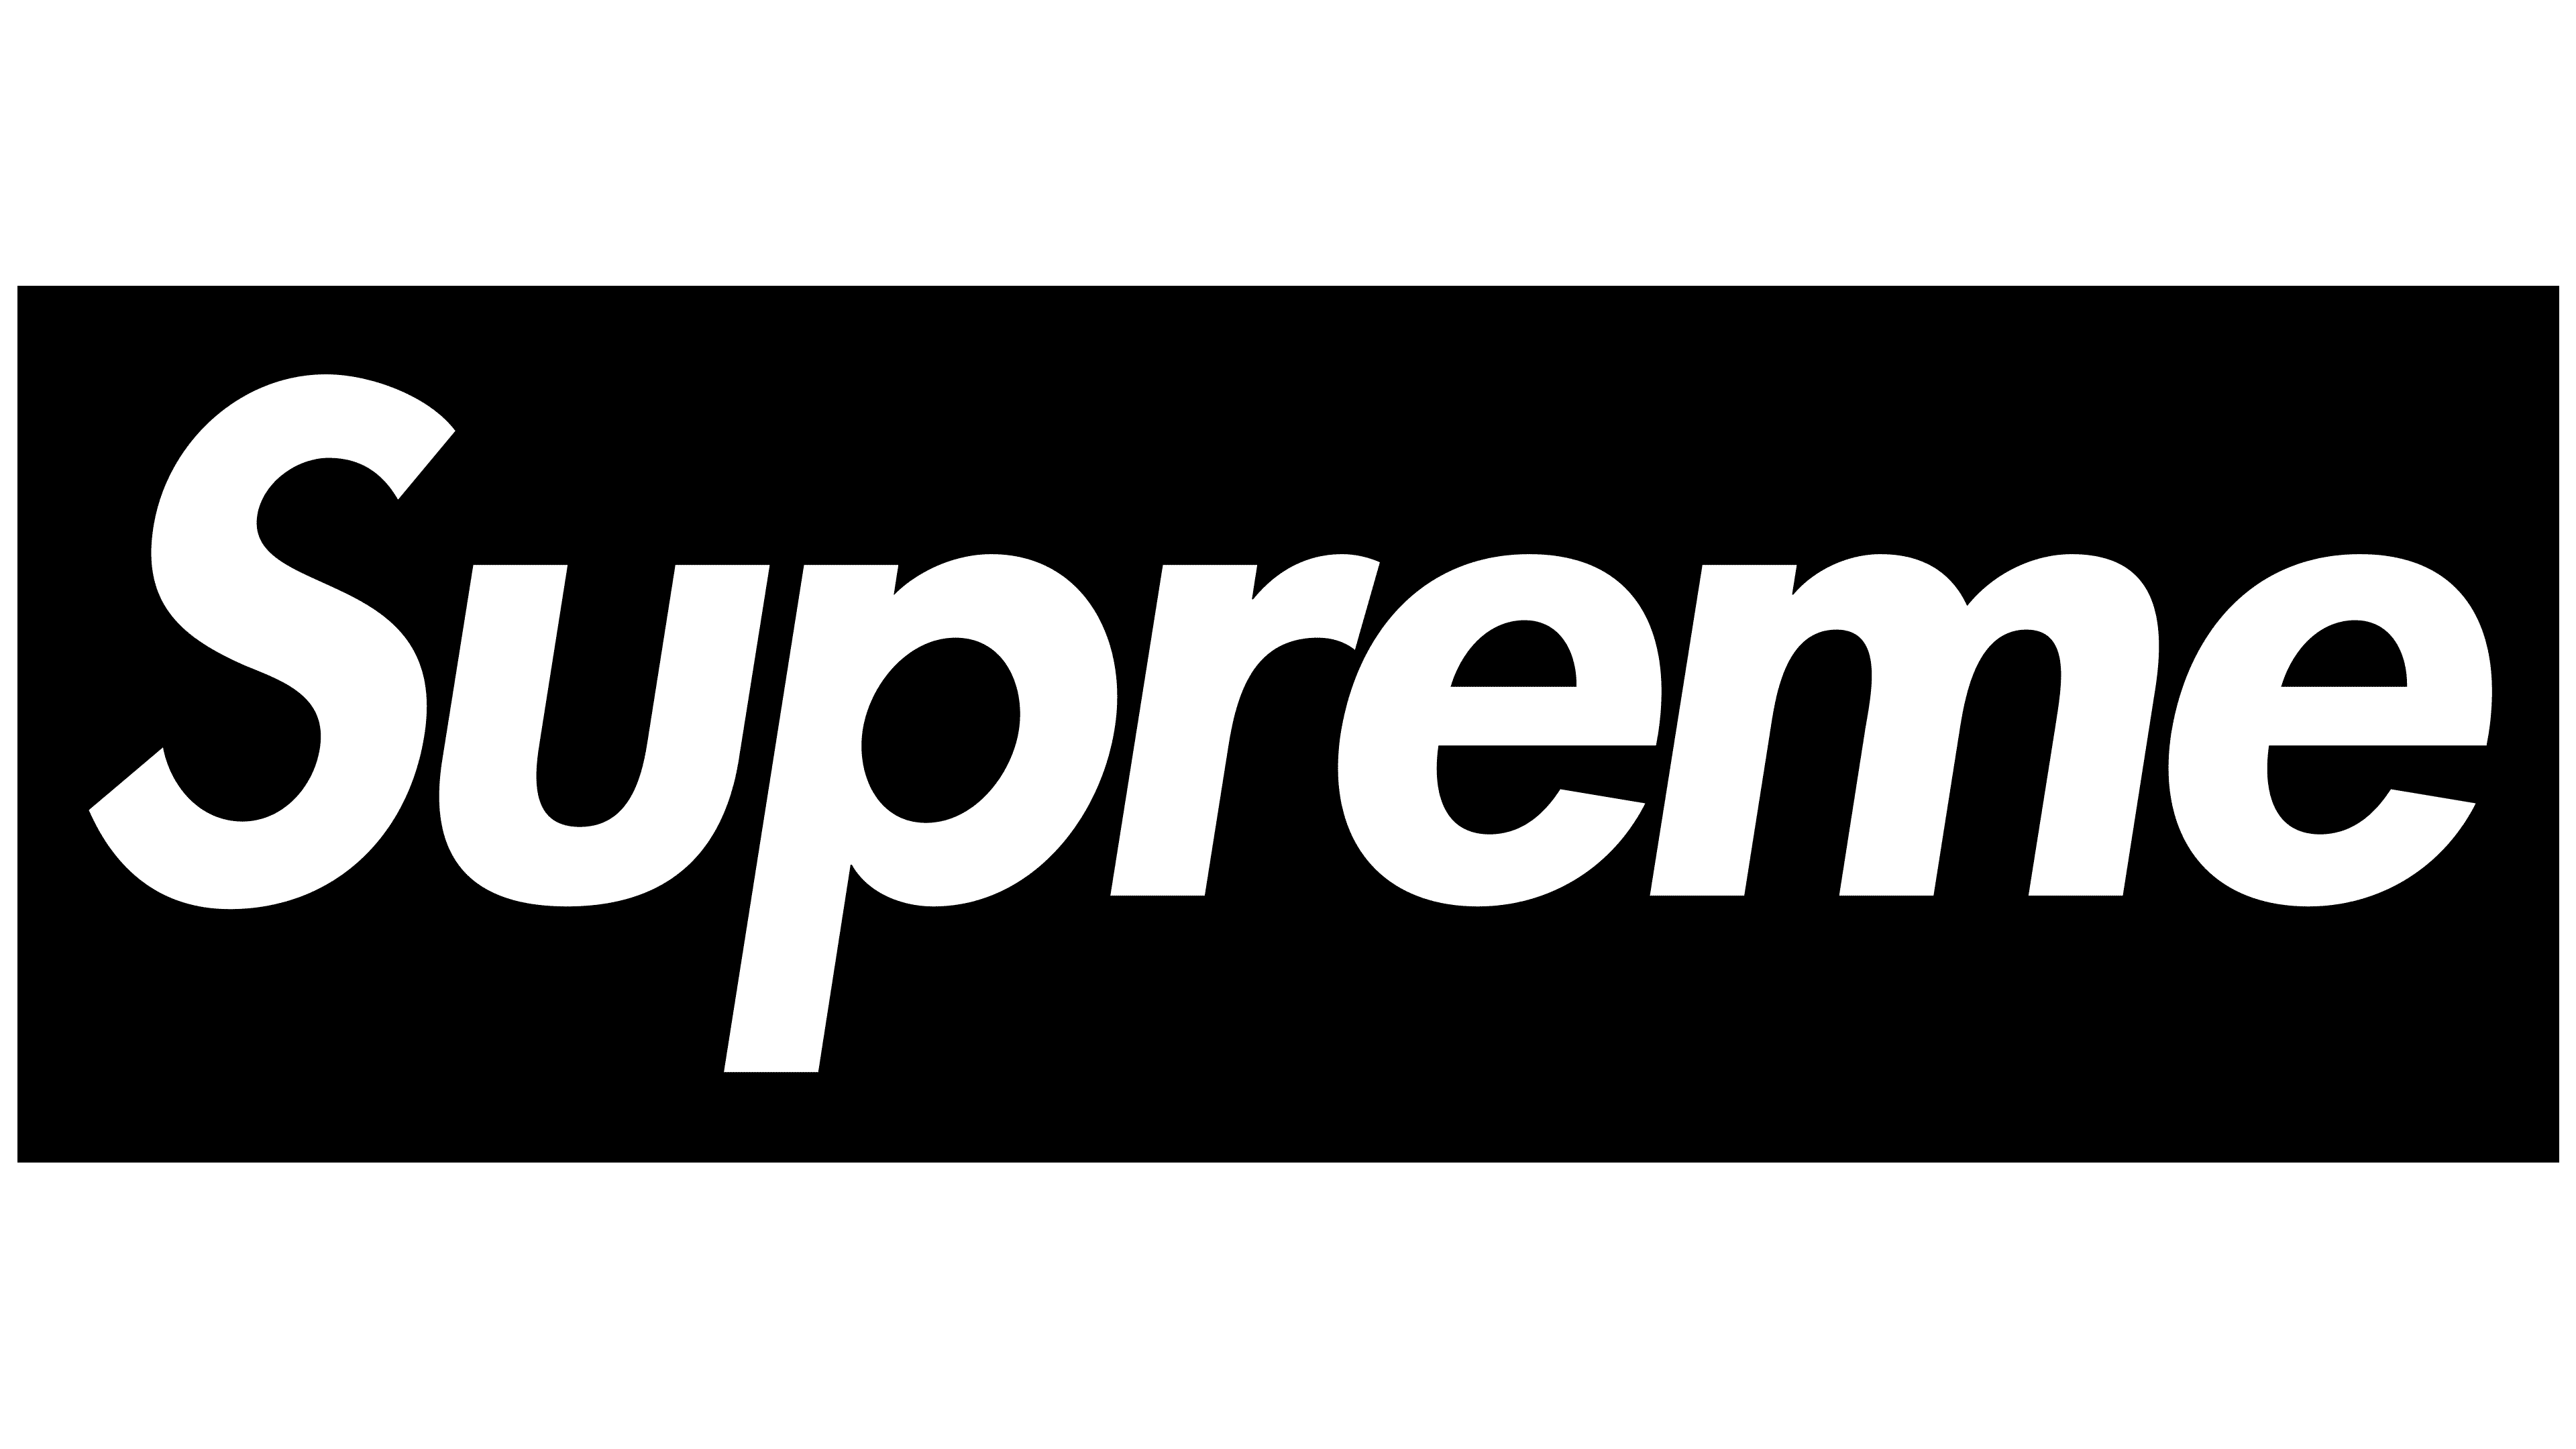 Products Supreme HD Wallpaper | Background Image